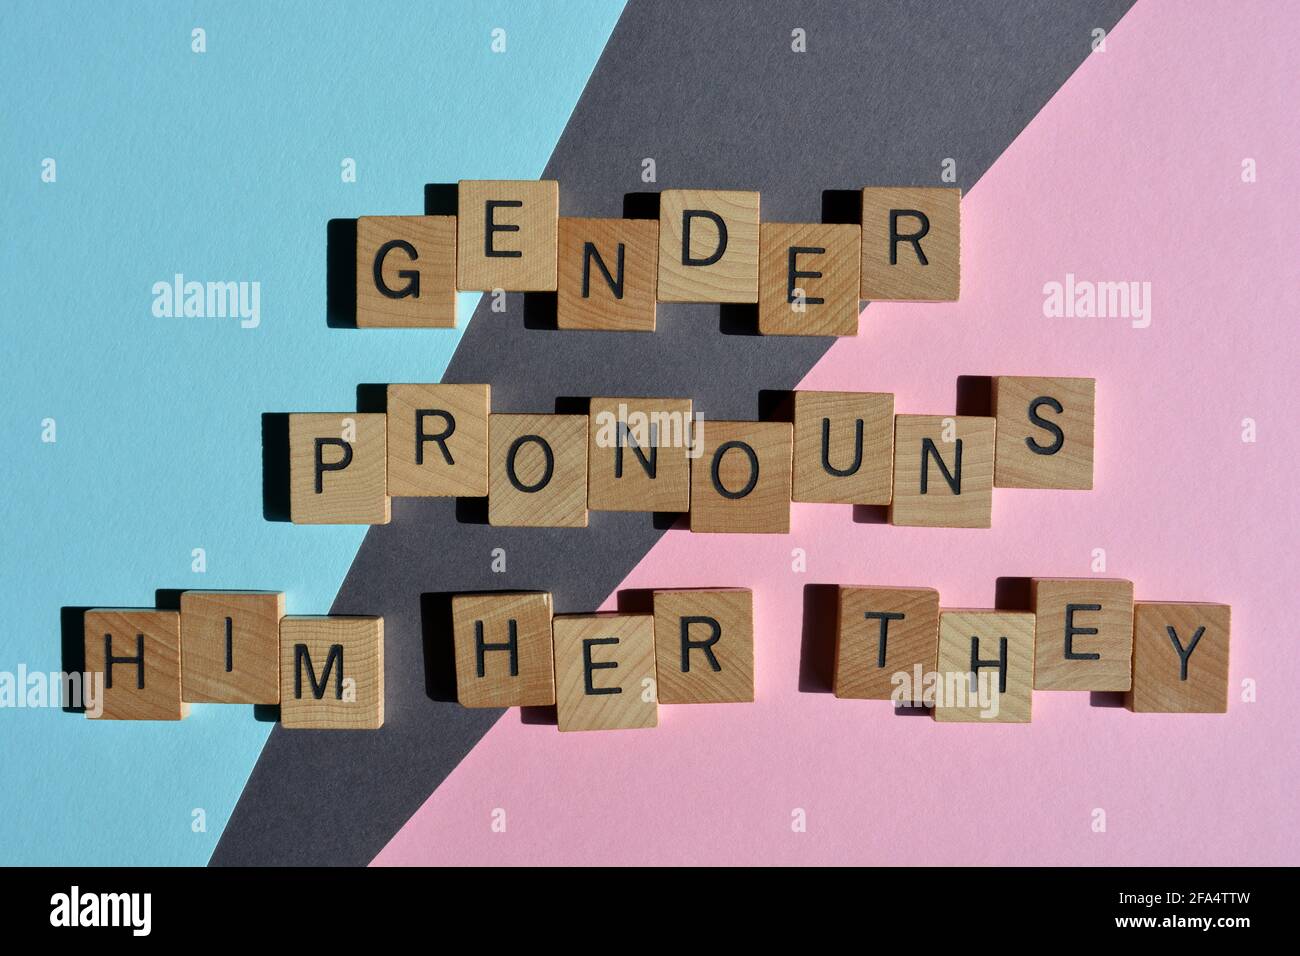 Gender Pronouns, Him, Her, They, words in wooden alphabet letters isolated on blue, grey and pink background Stock Photo